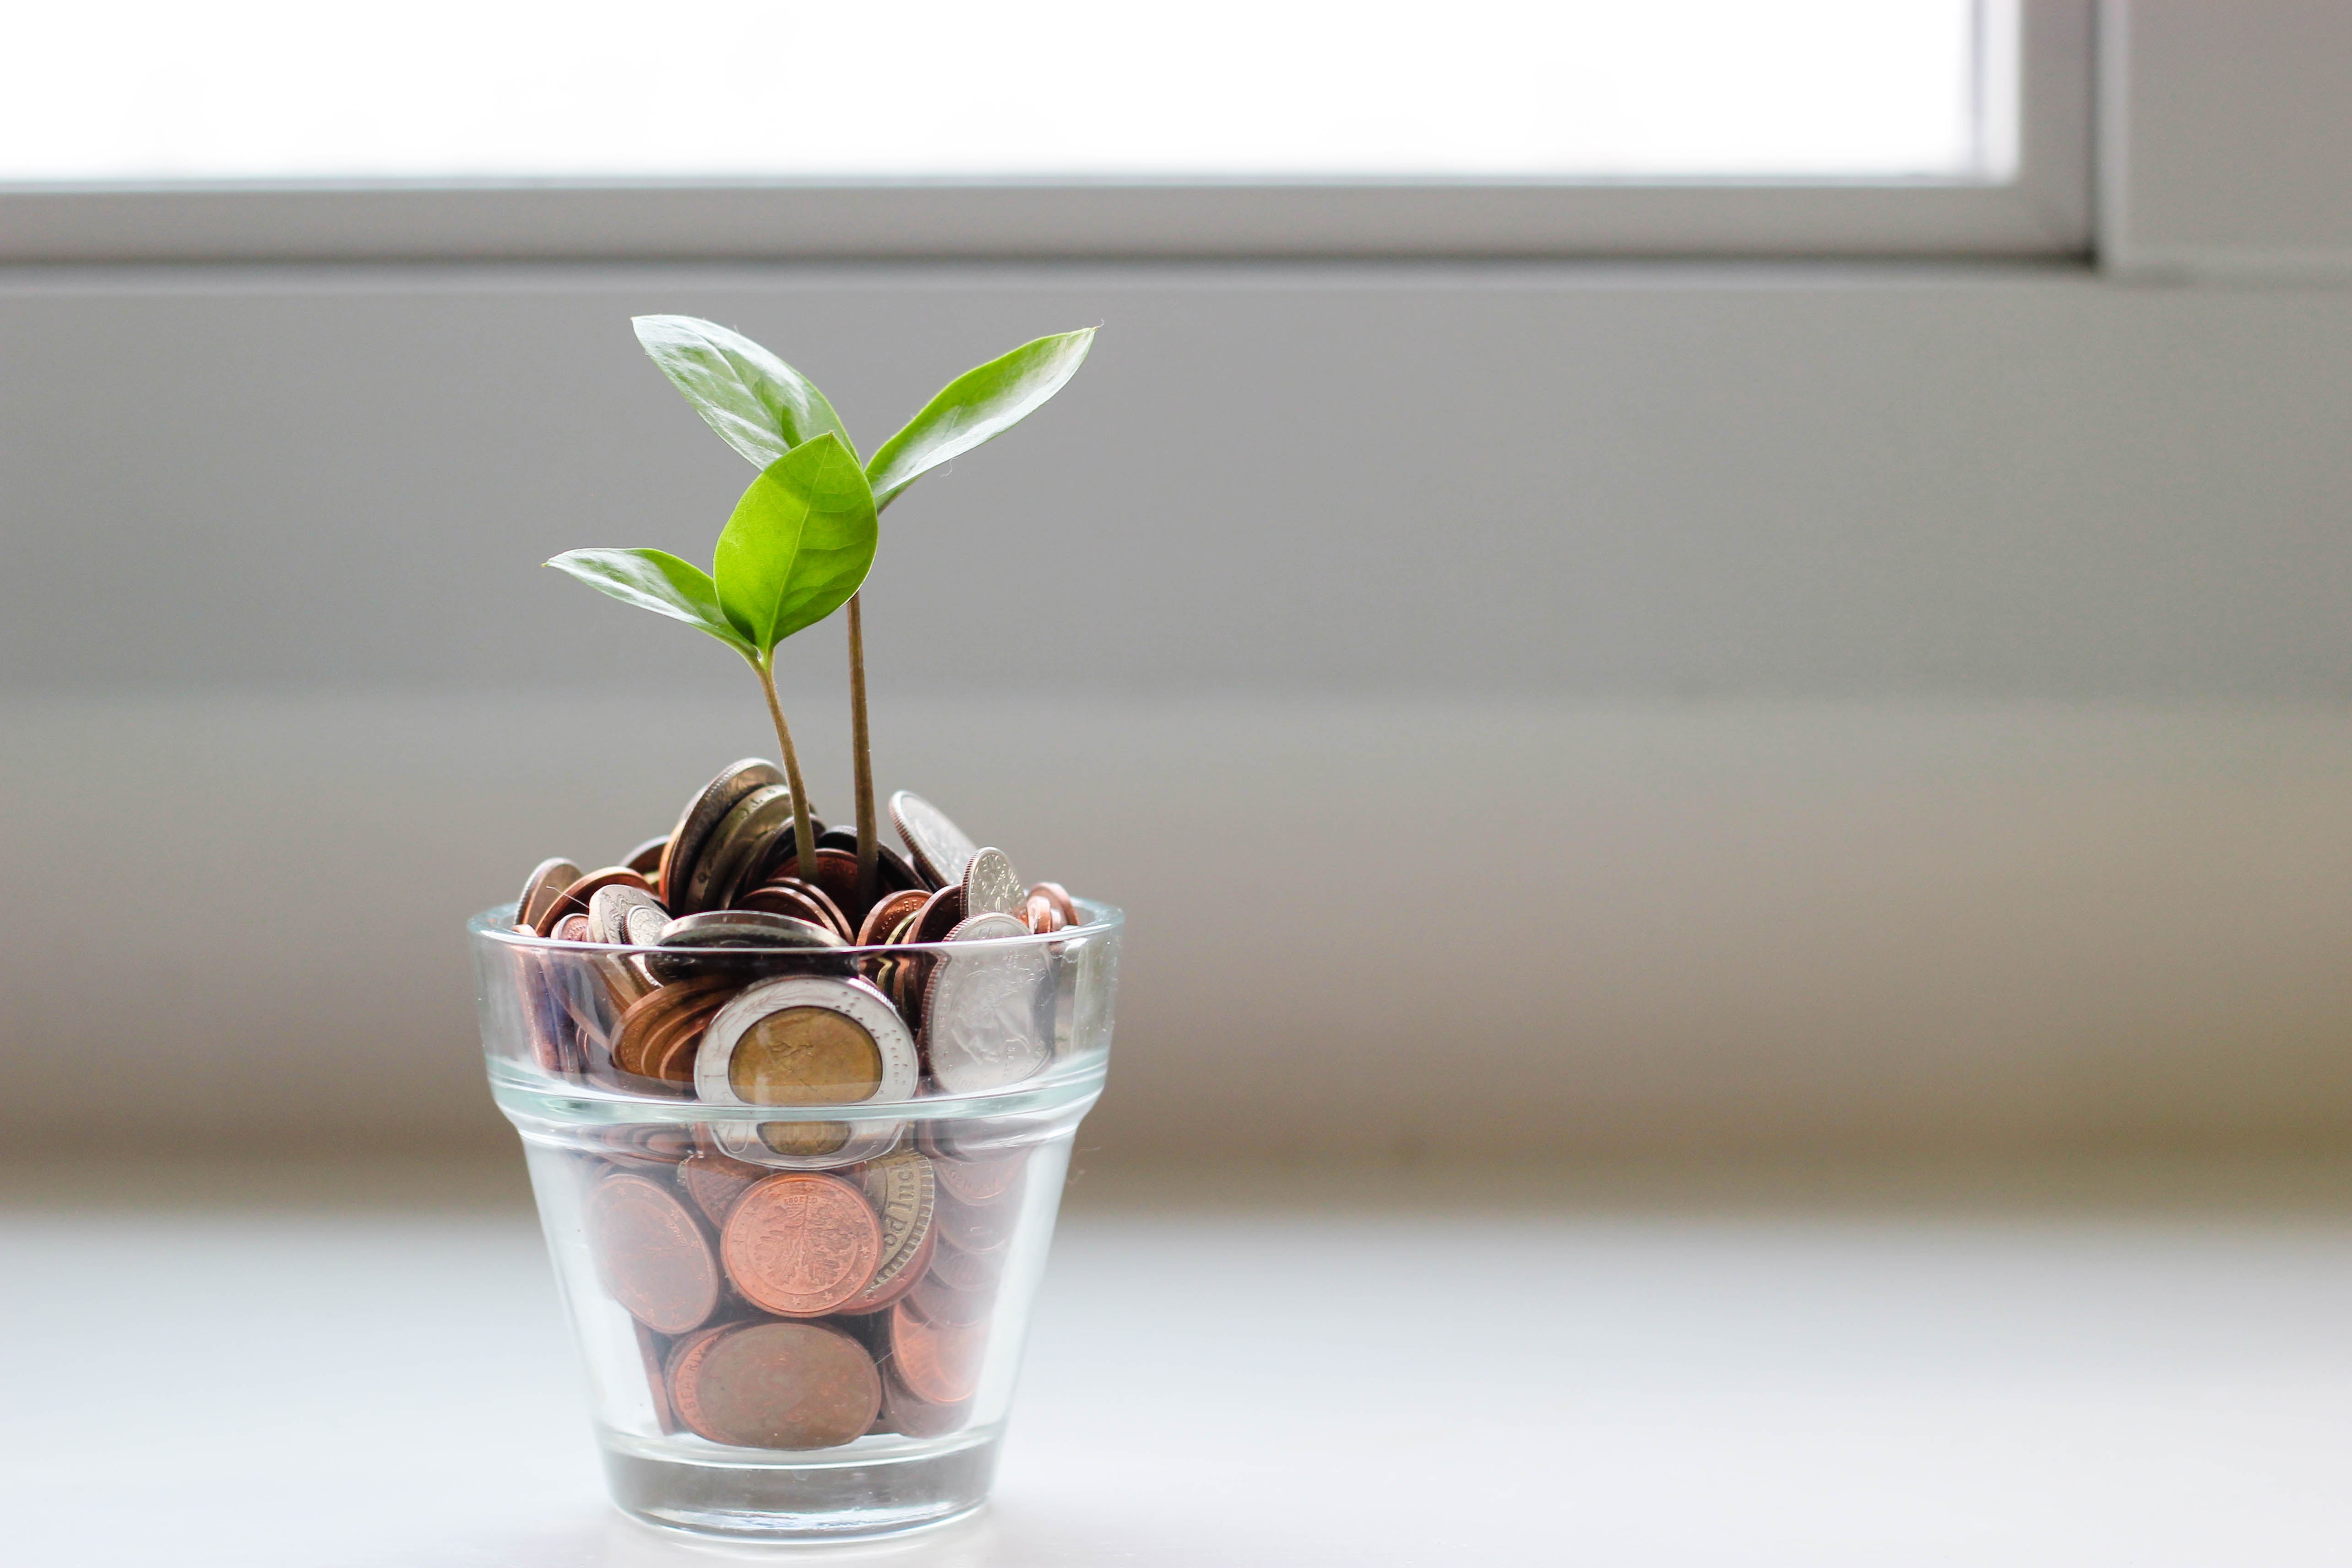 Plant growing out of coins